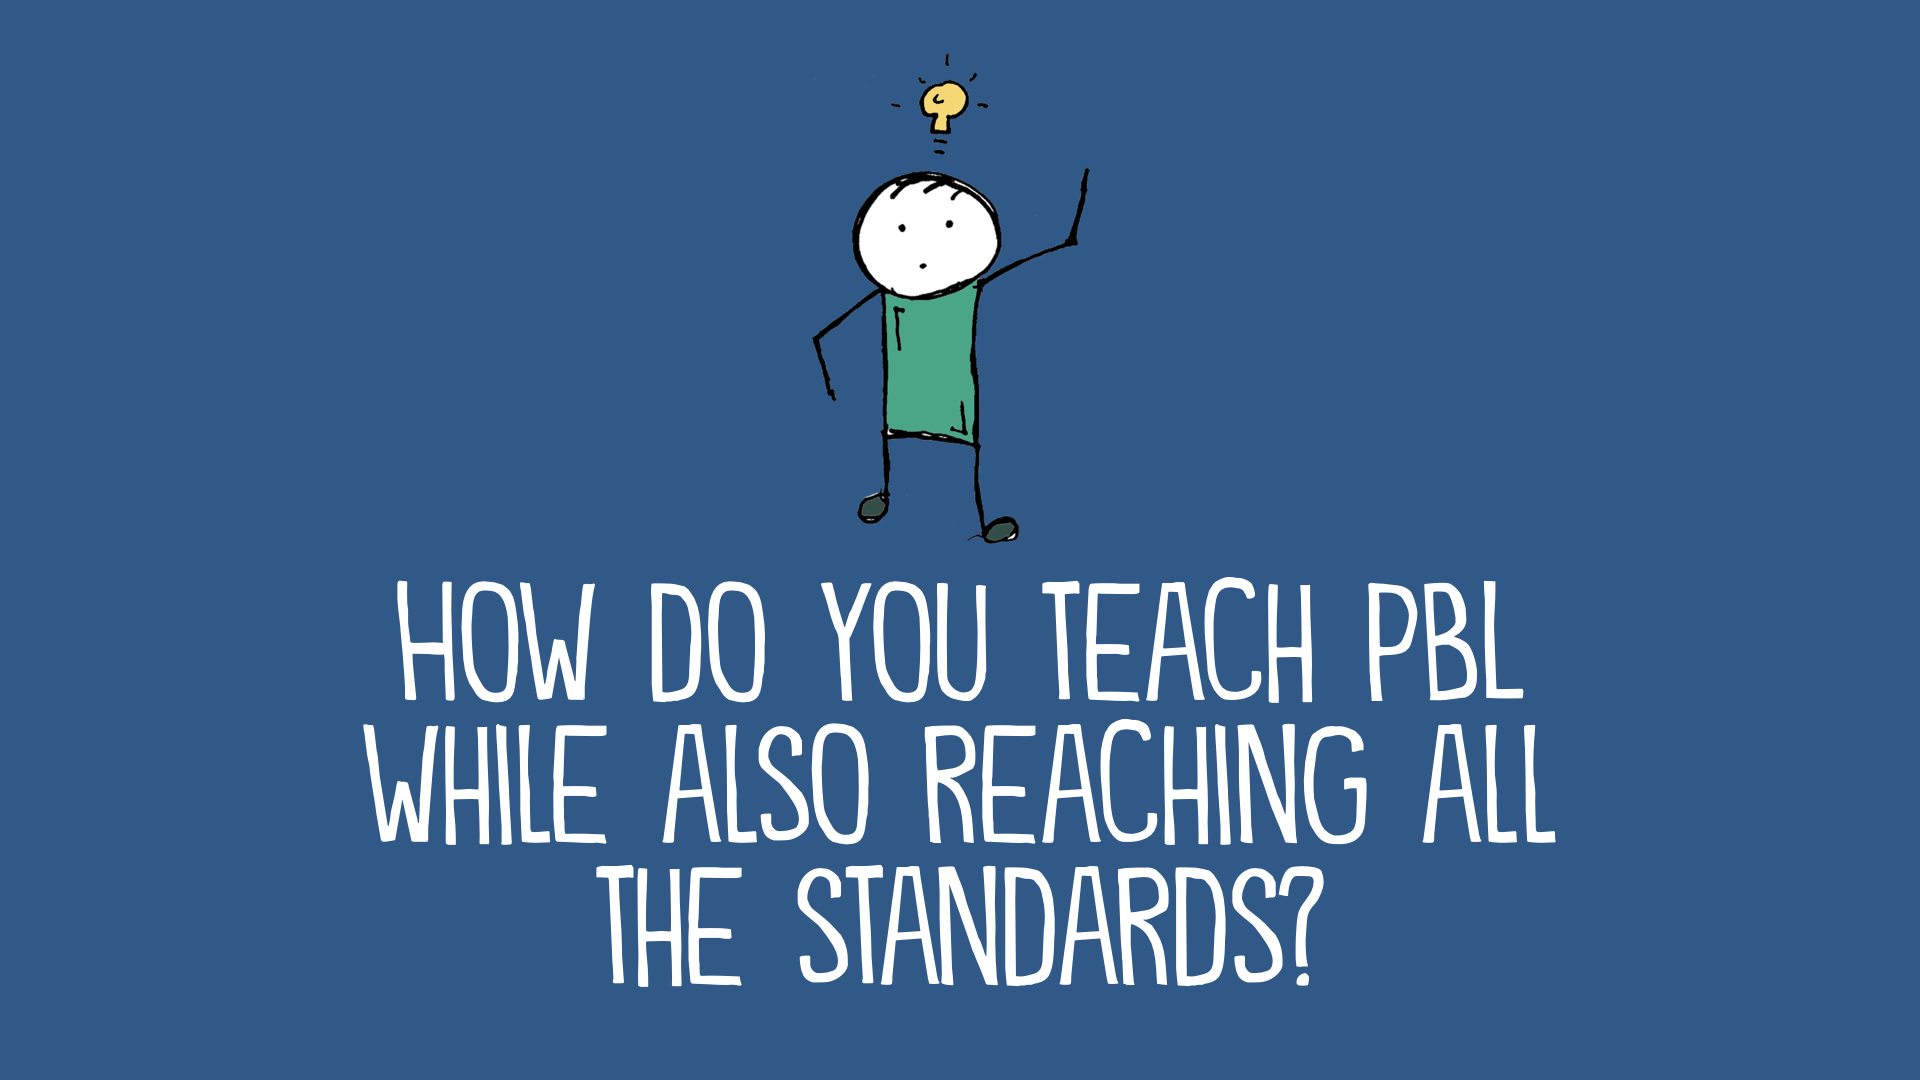 teaching PBL to students while covering standards